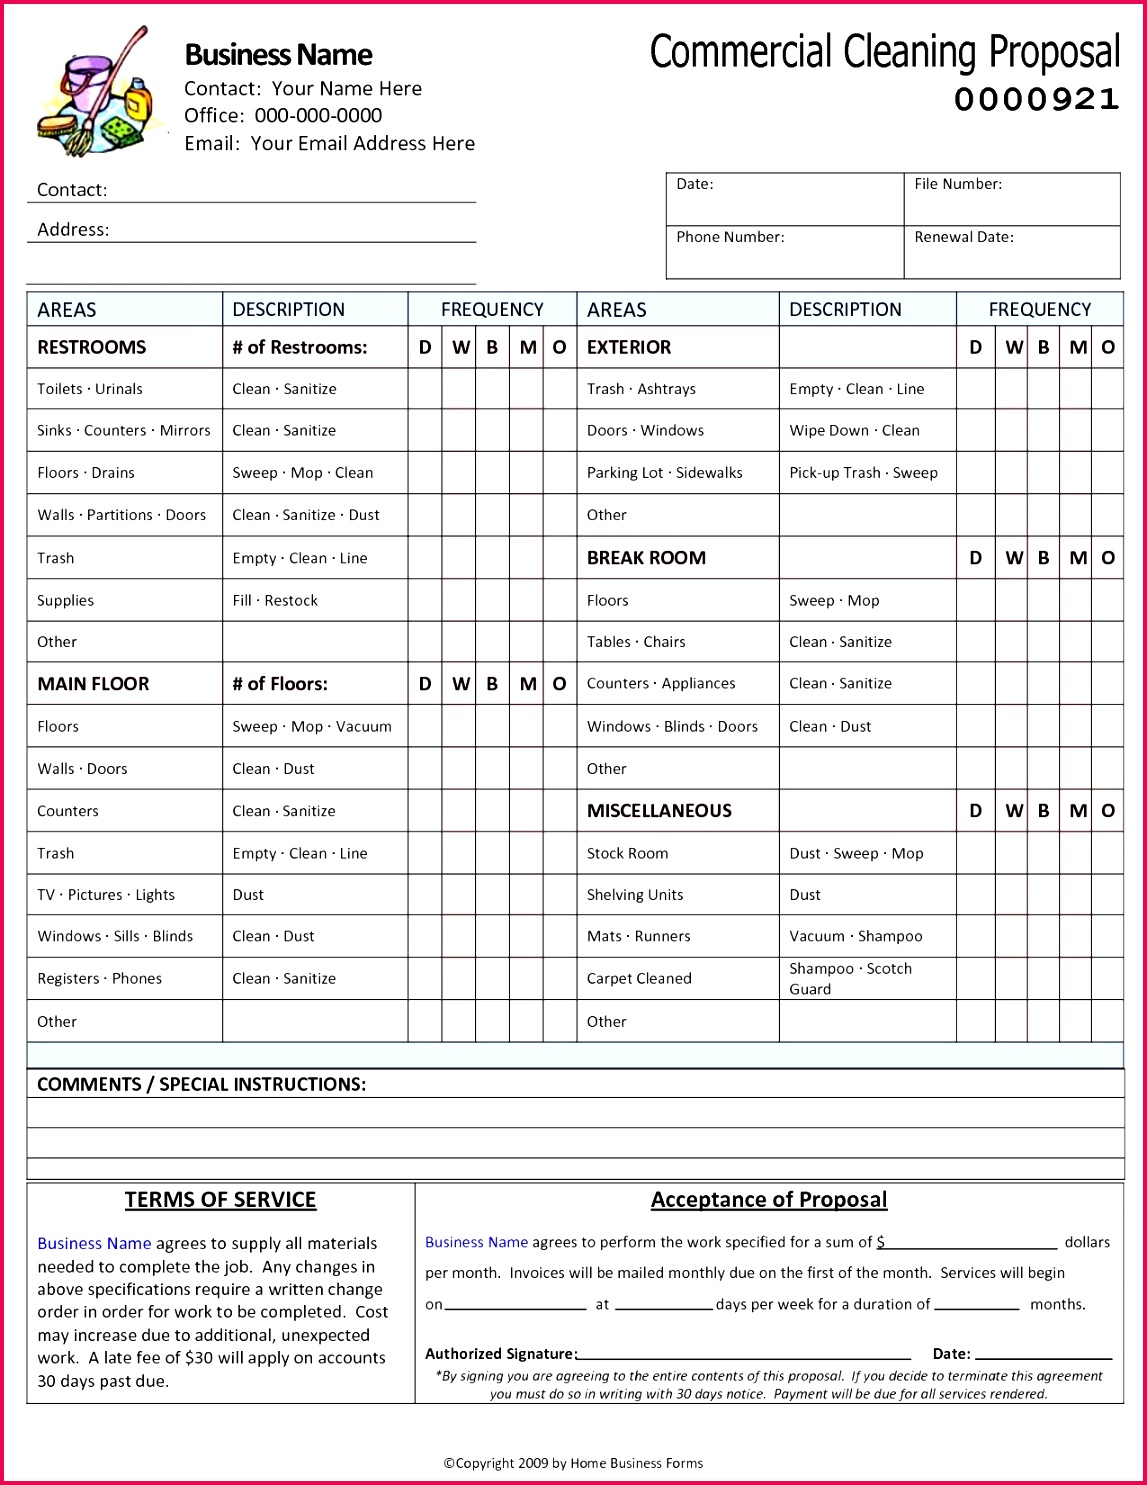 5 Pro forma Profit and Loss Template Excel 43630 FabTemplatez